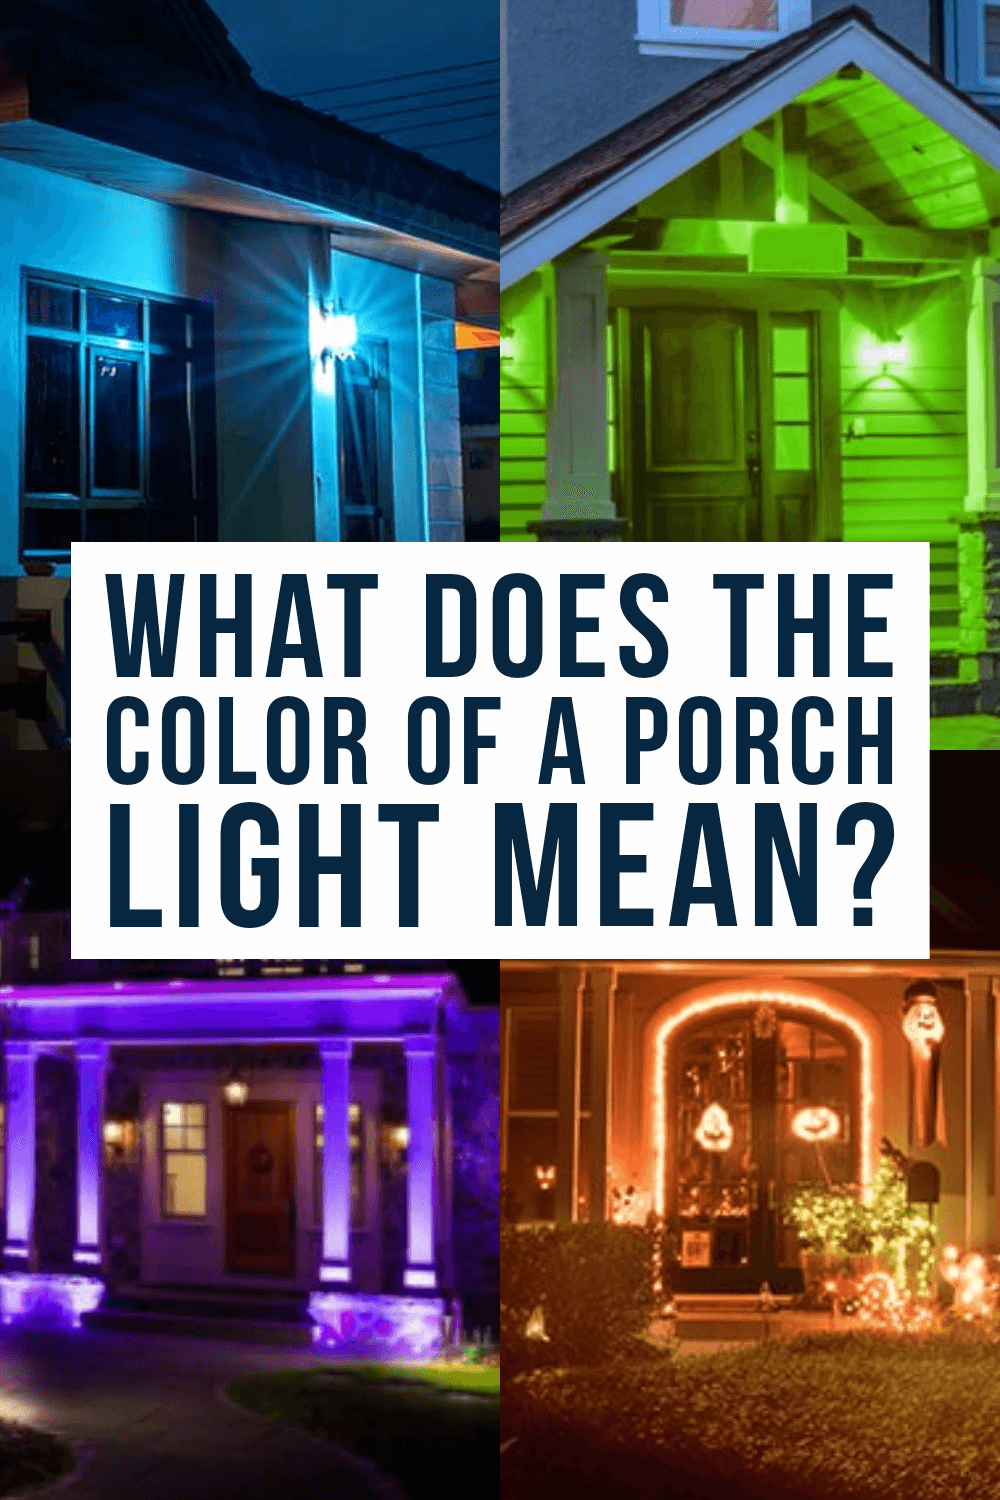 what does the color of a porch light mean?